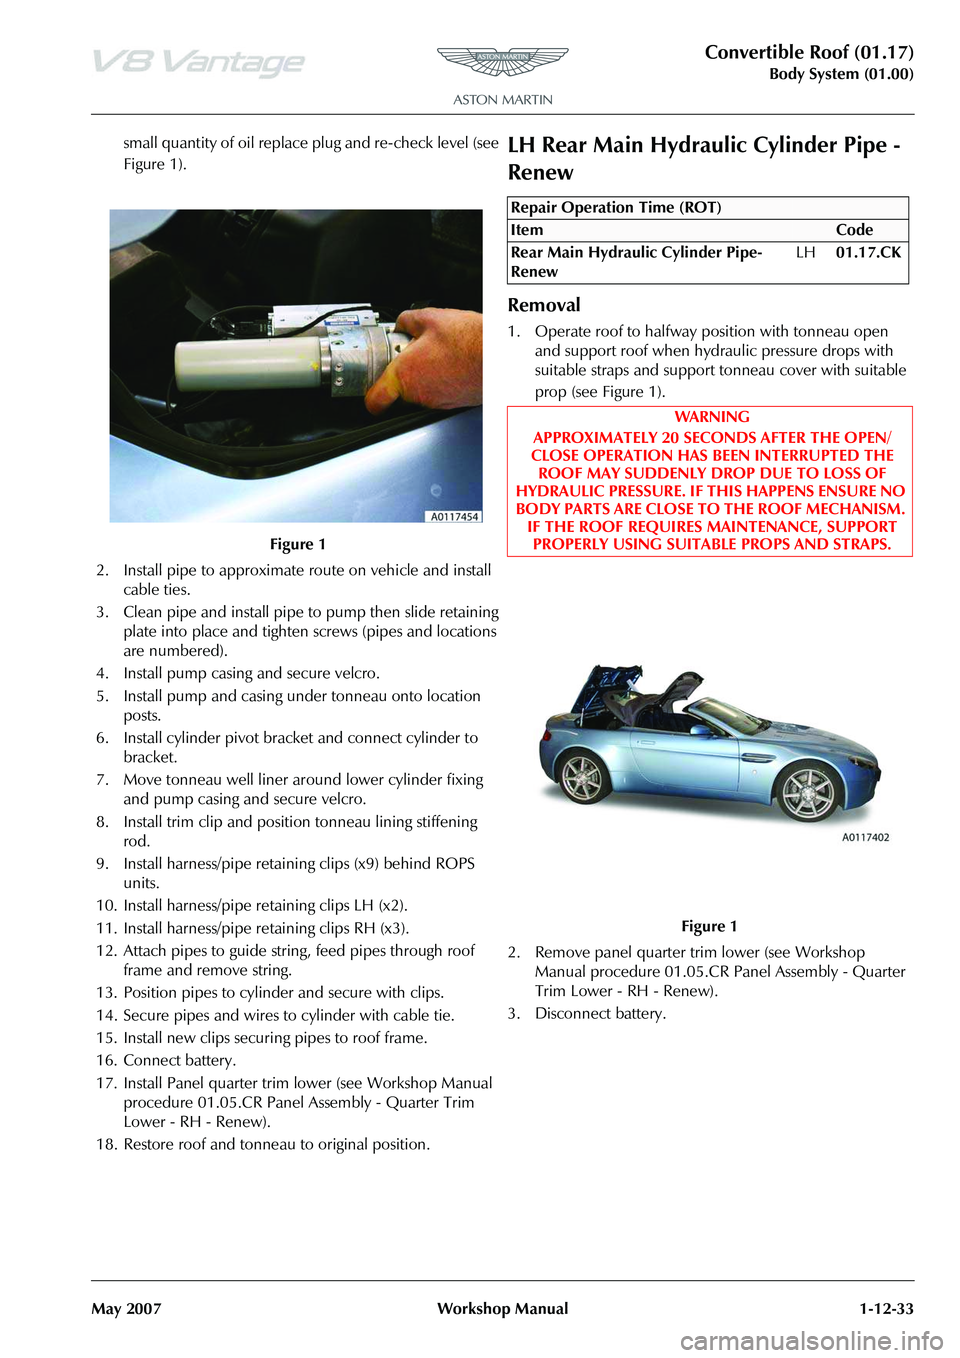 ASTON MARTIN V8 VANTAGE 2010  Workshop Manual Convertible Roof (01.17)
Body System (01.00)
May 2007 Workshop Manual 1-12-33
small quantity of oil replace plug and re-check level (see 
Figure 1).
2. Install pipe to approximate route on vehicle and